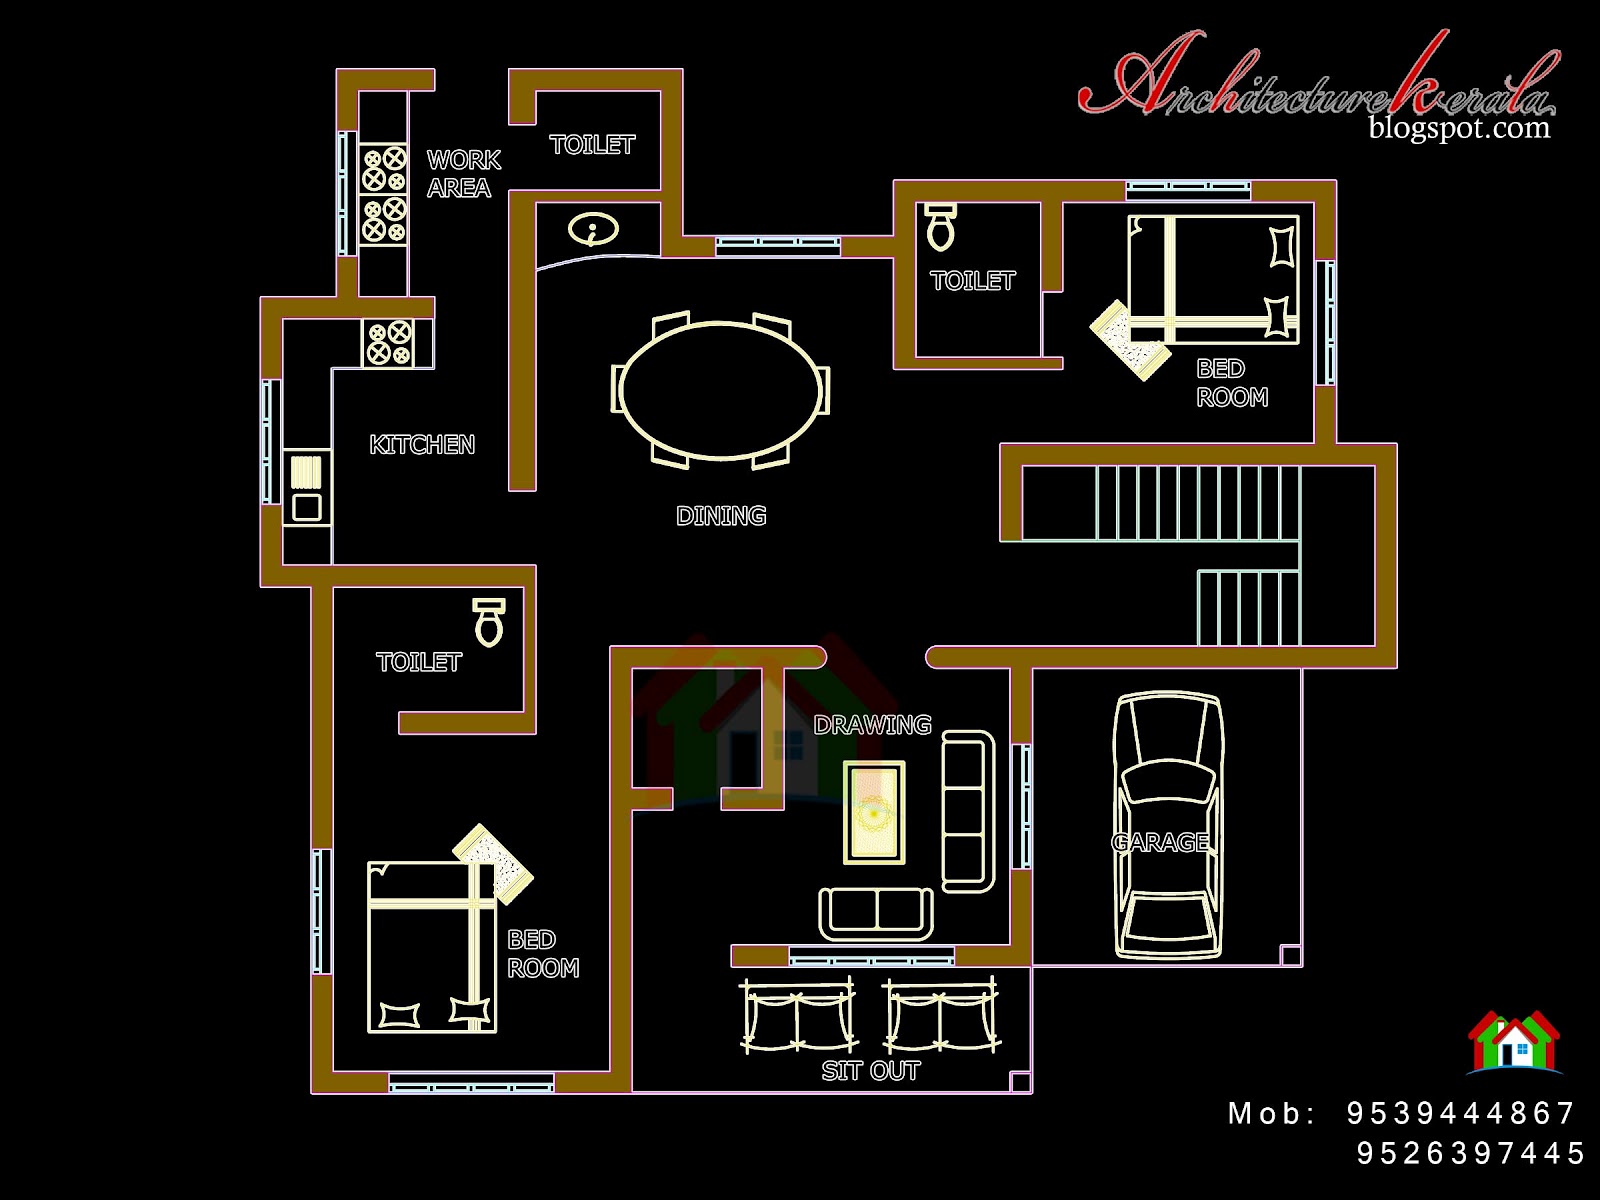 Architecture Kerala  FOUR BED ROOM HOUSE  PLAN